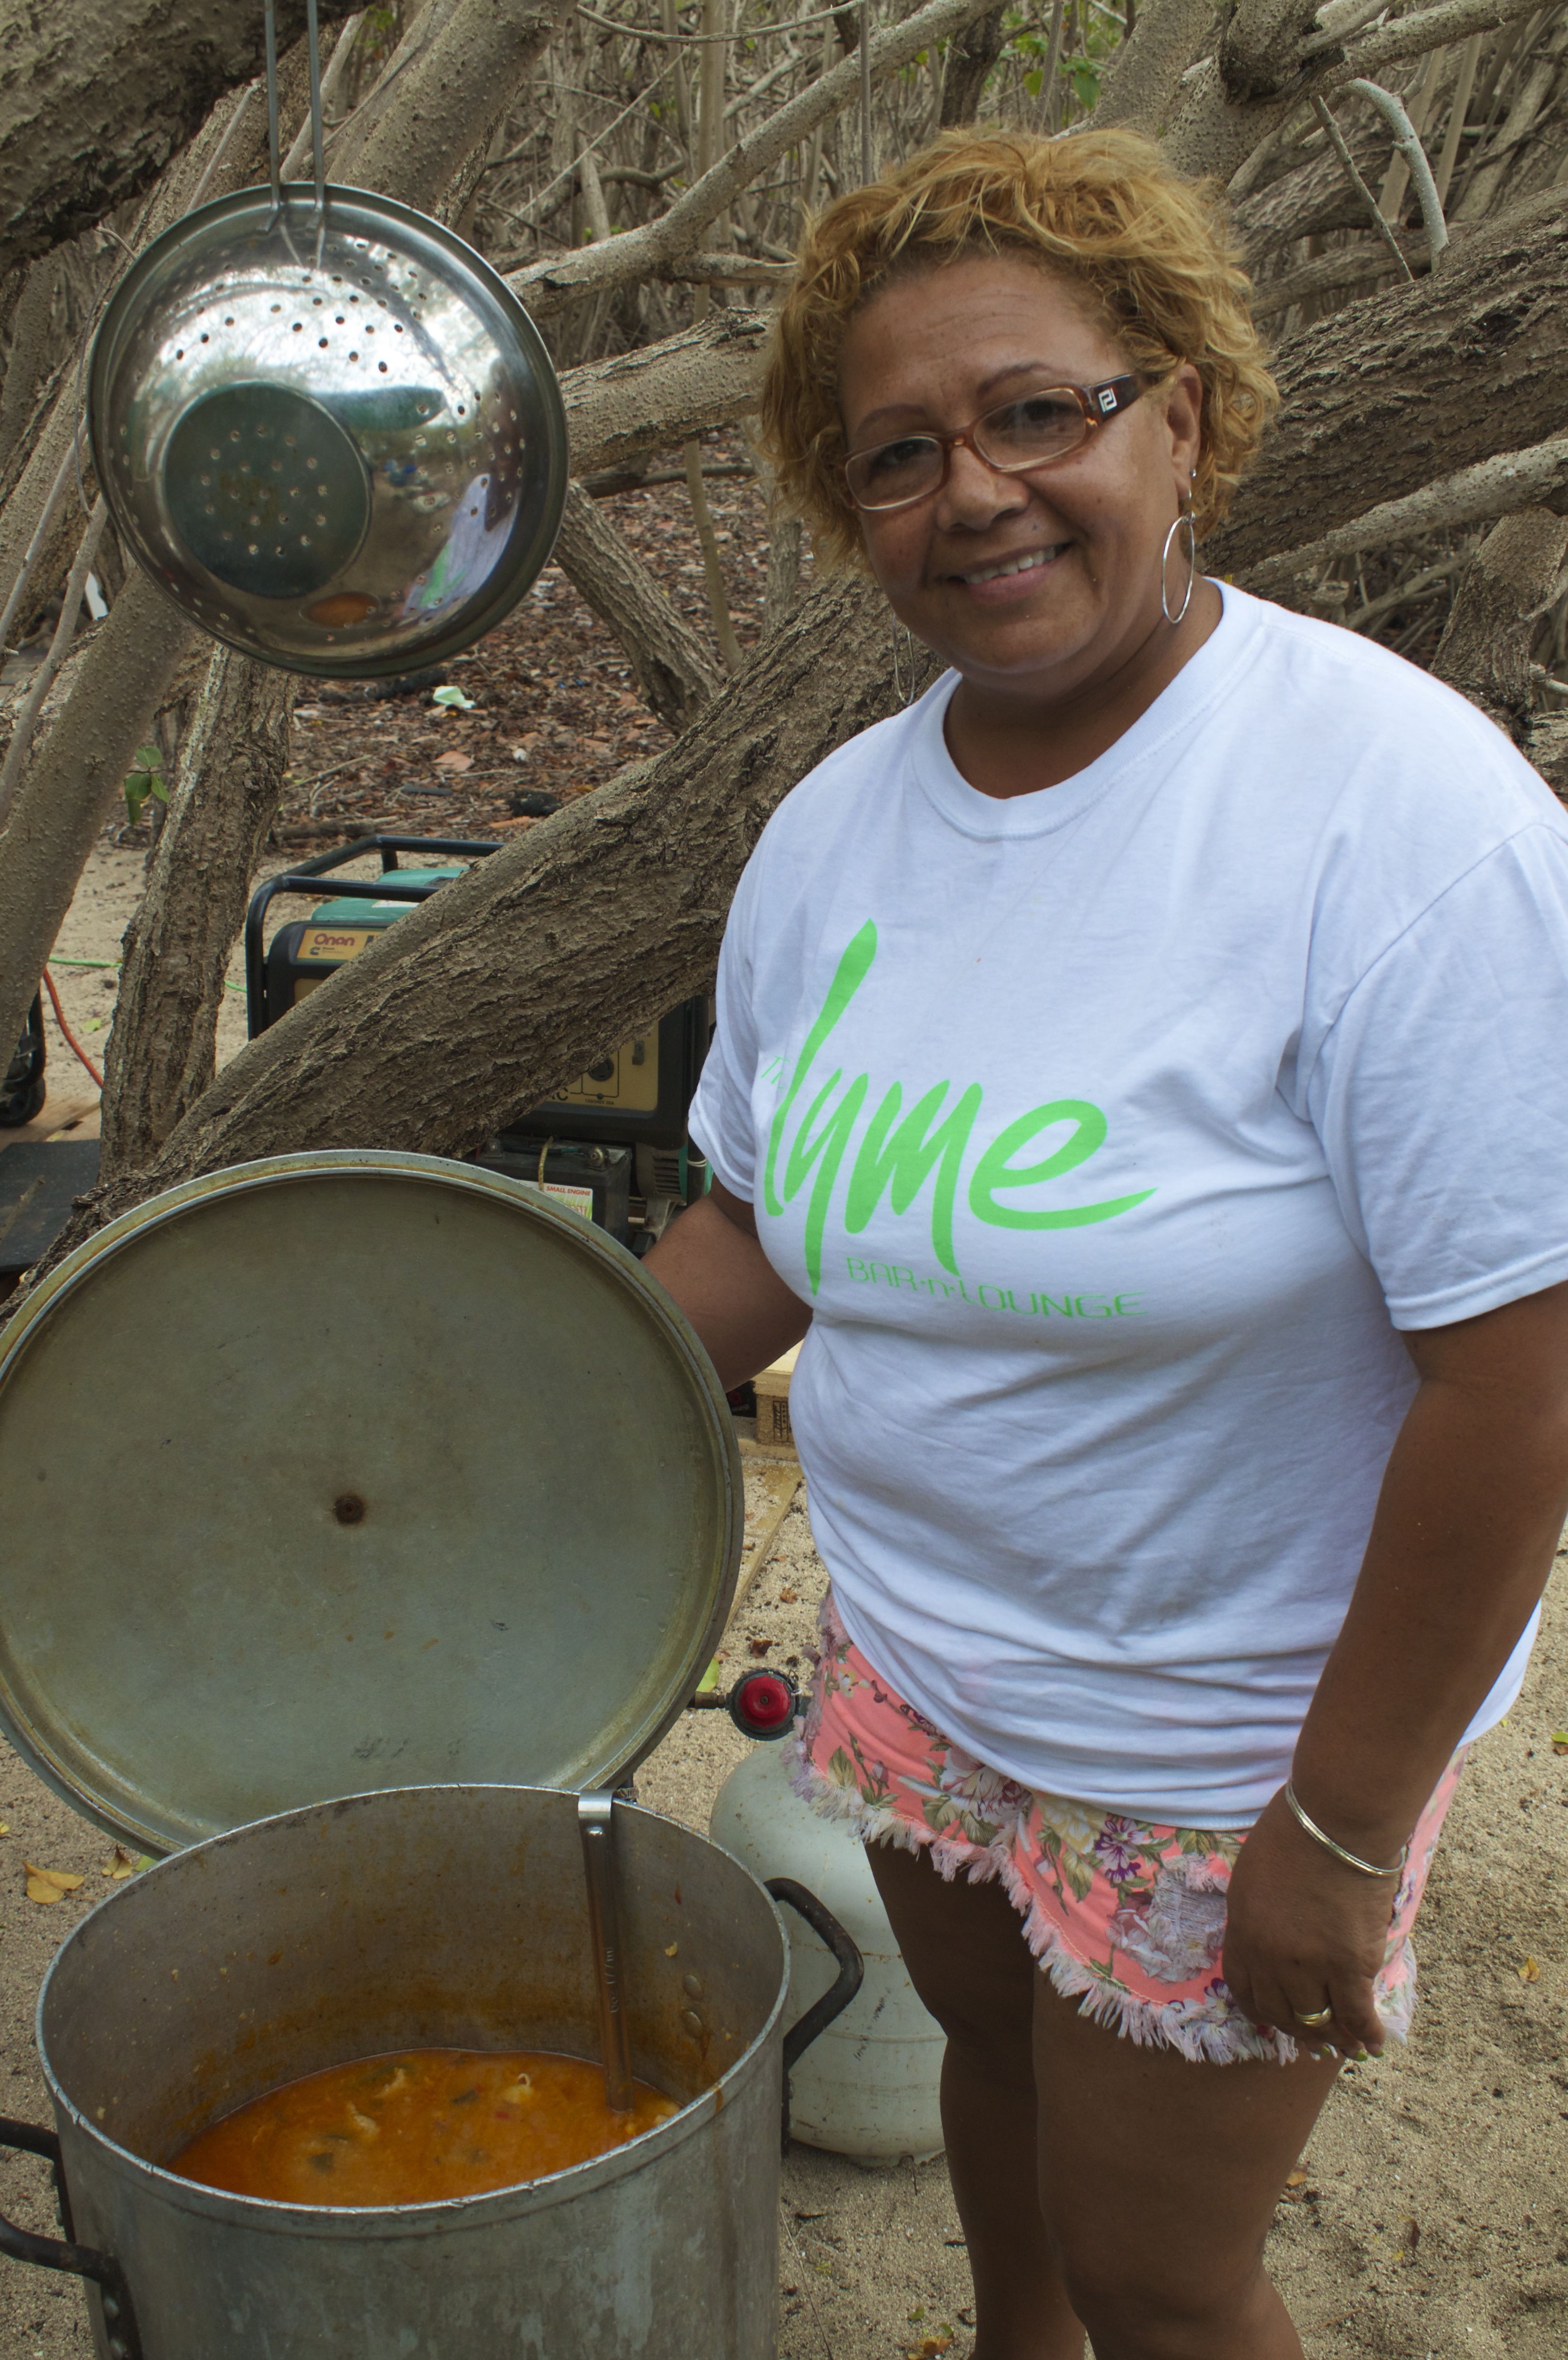  Yvonne Ortiz, owner of El Flamboyant Restaurant, serves her famous chicken soup to visitors to her camp.